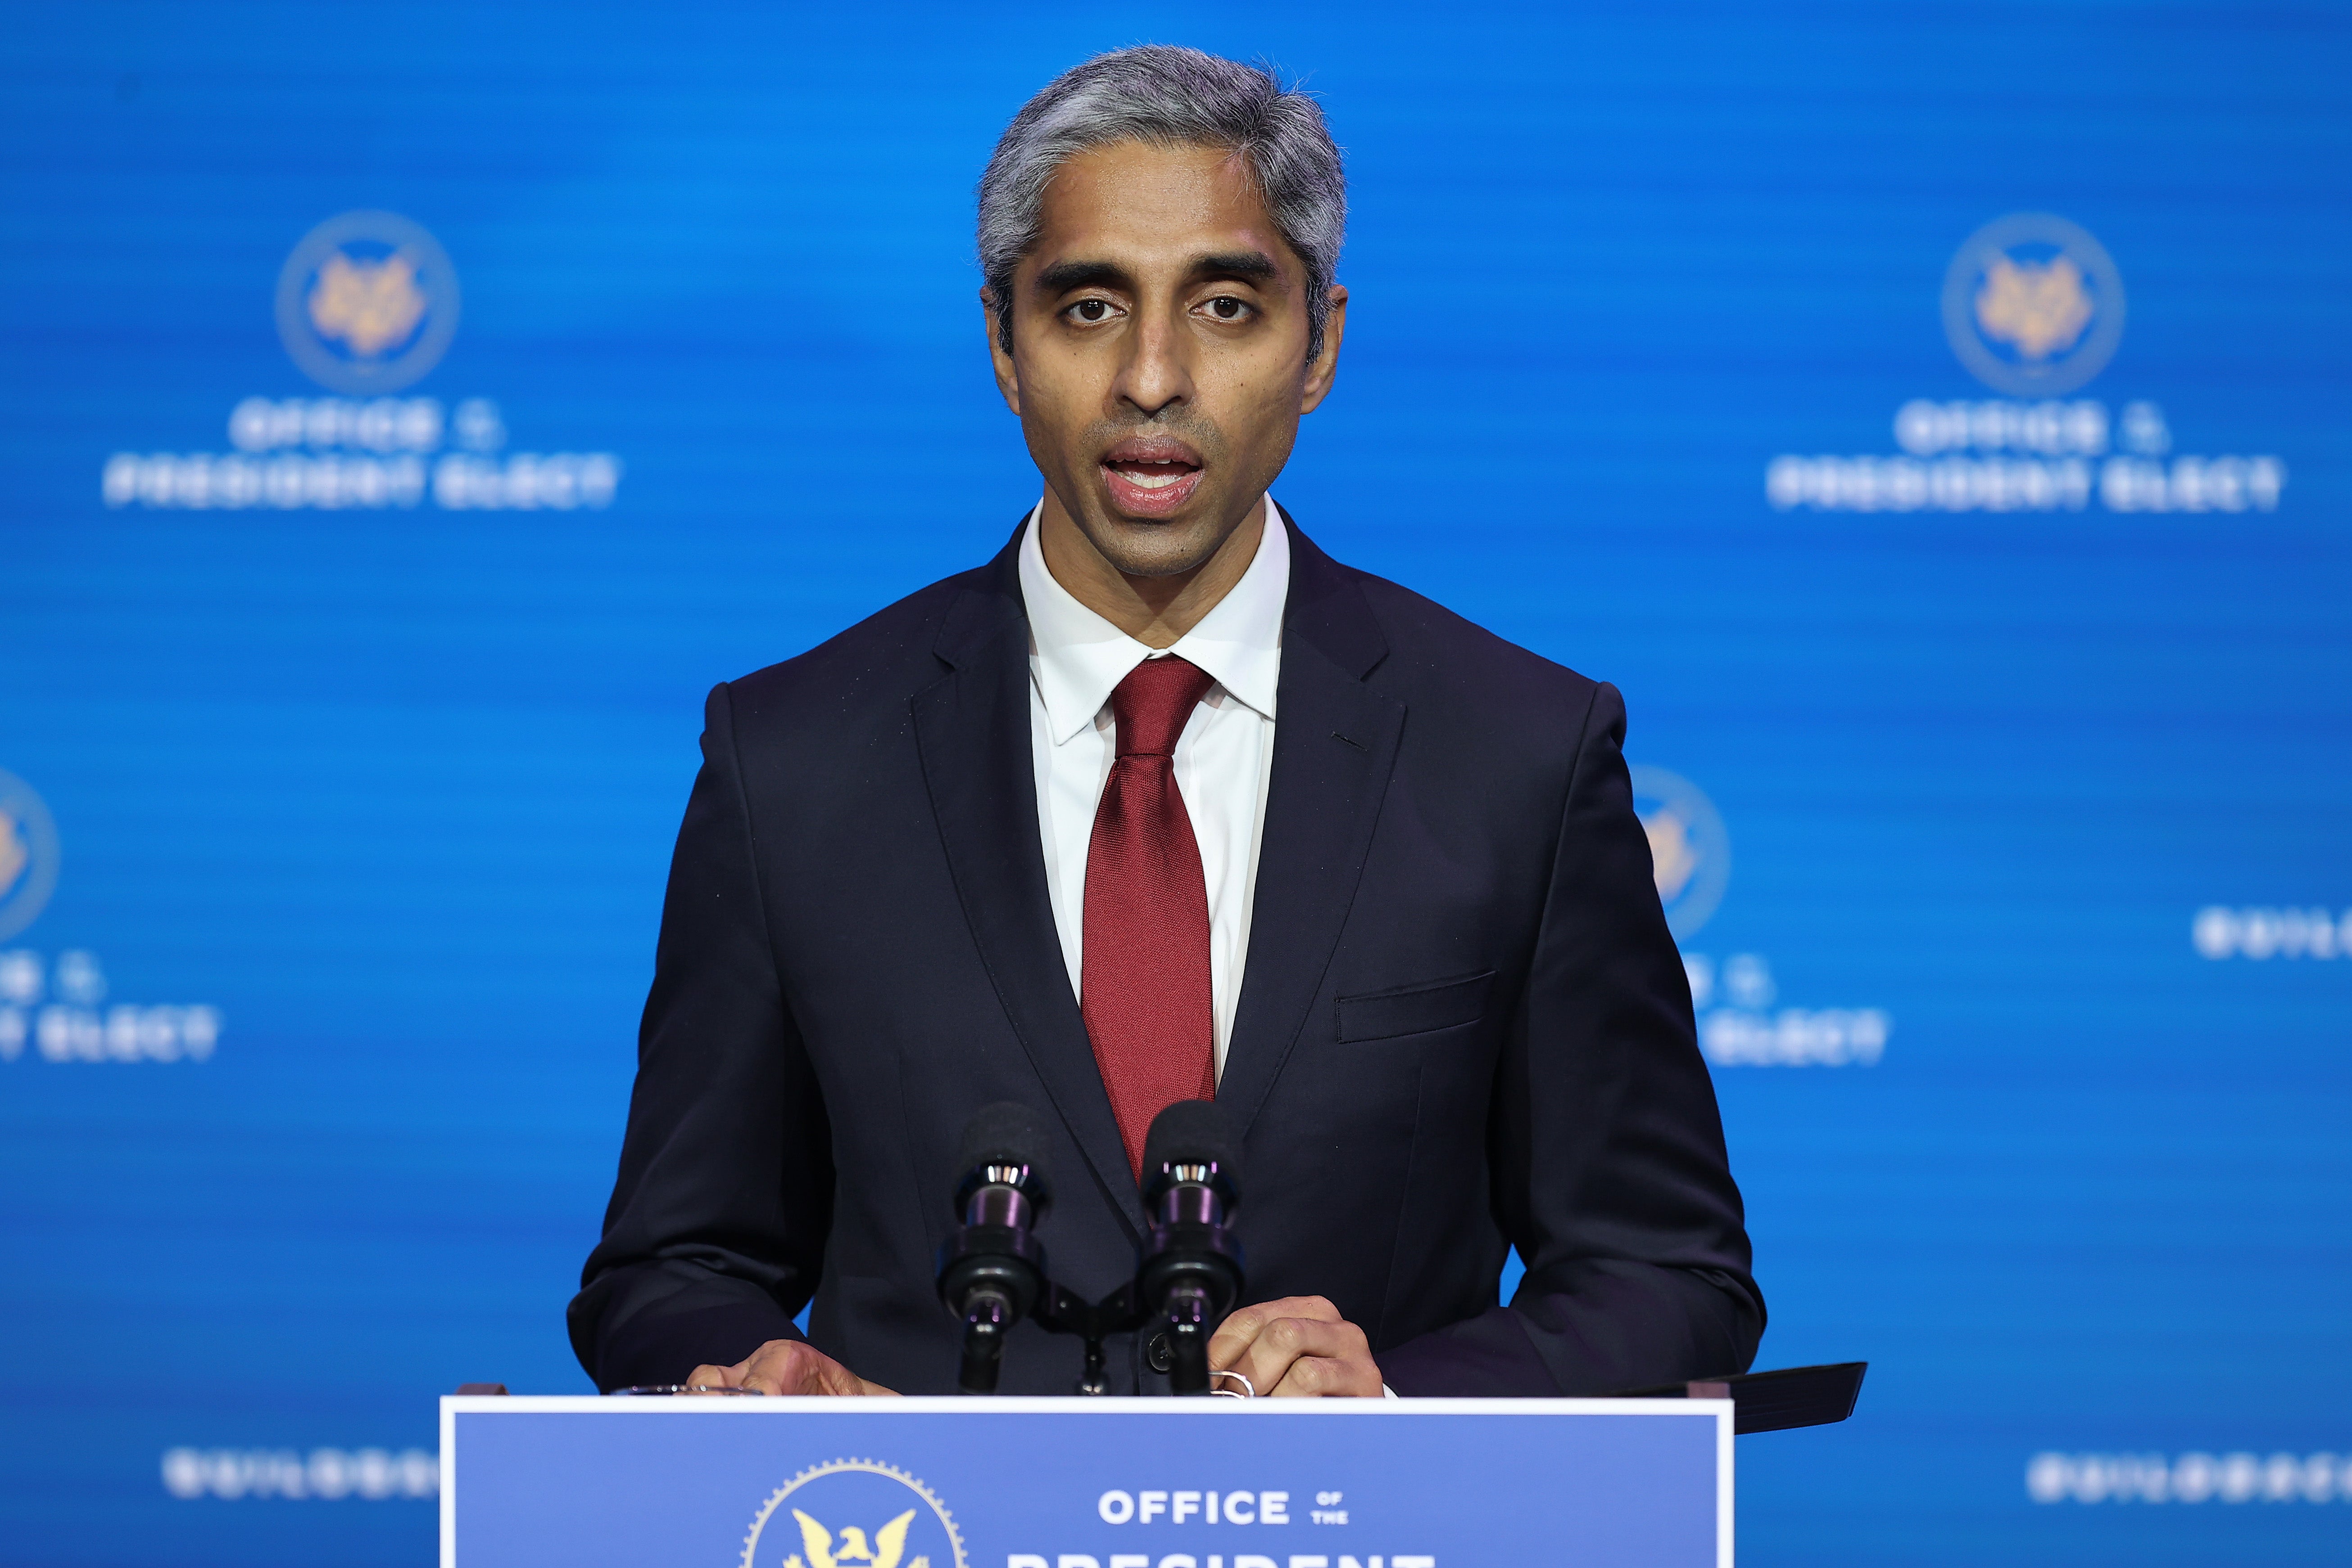 Surgeon General Vivek Murthy speaks at a news conference on 8 December 2020